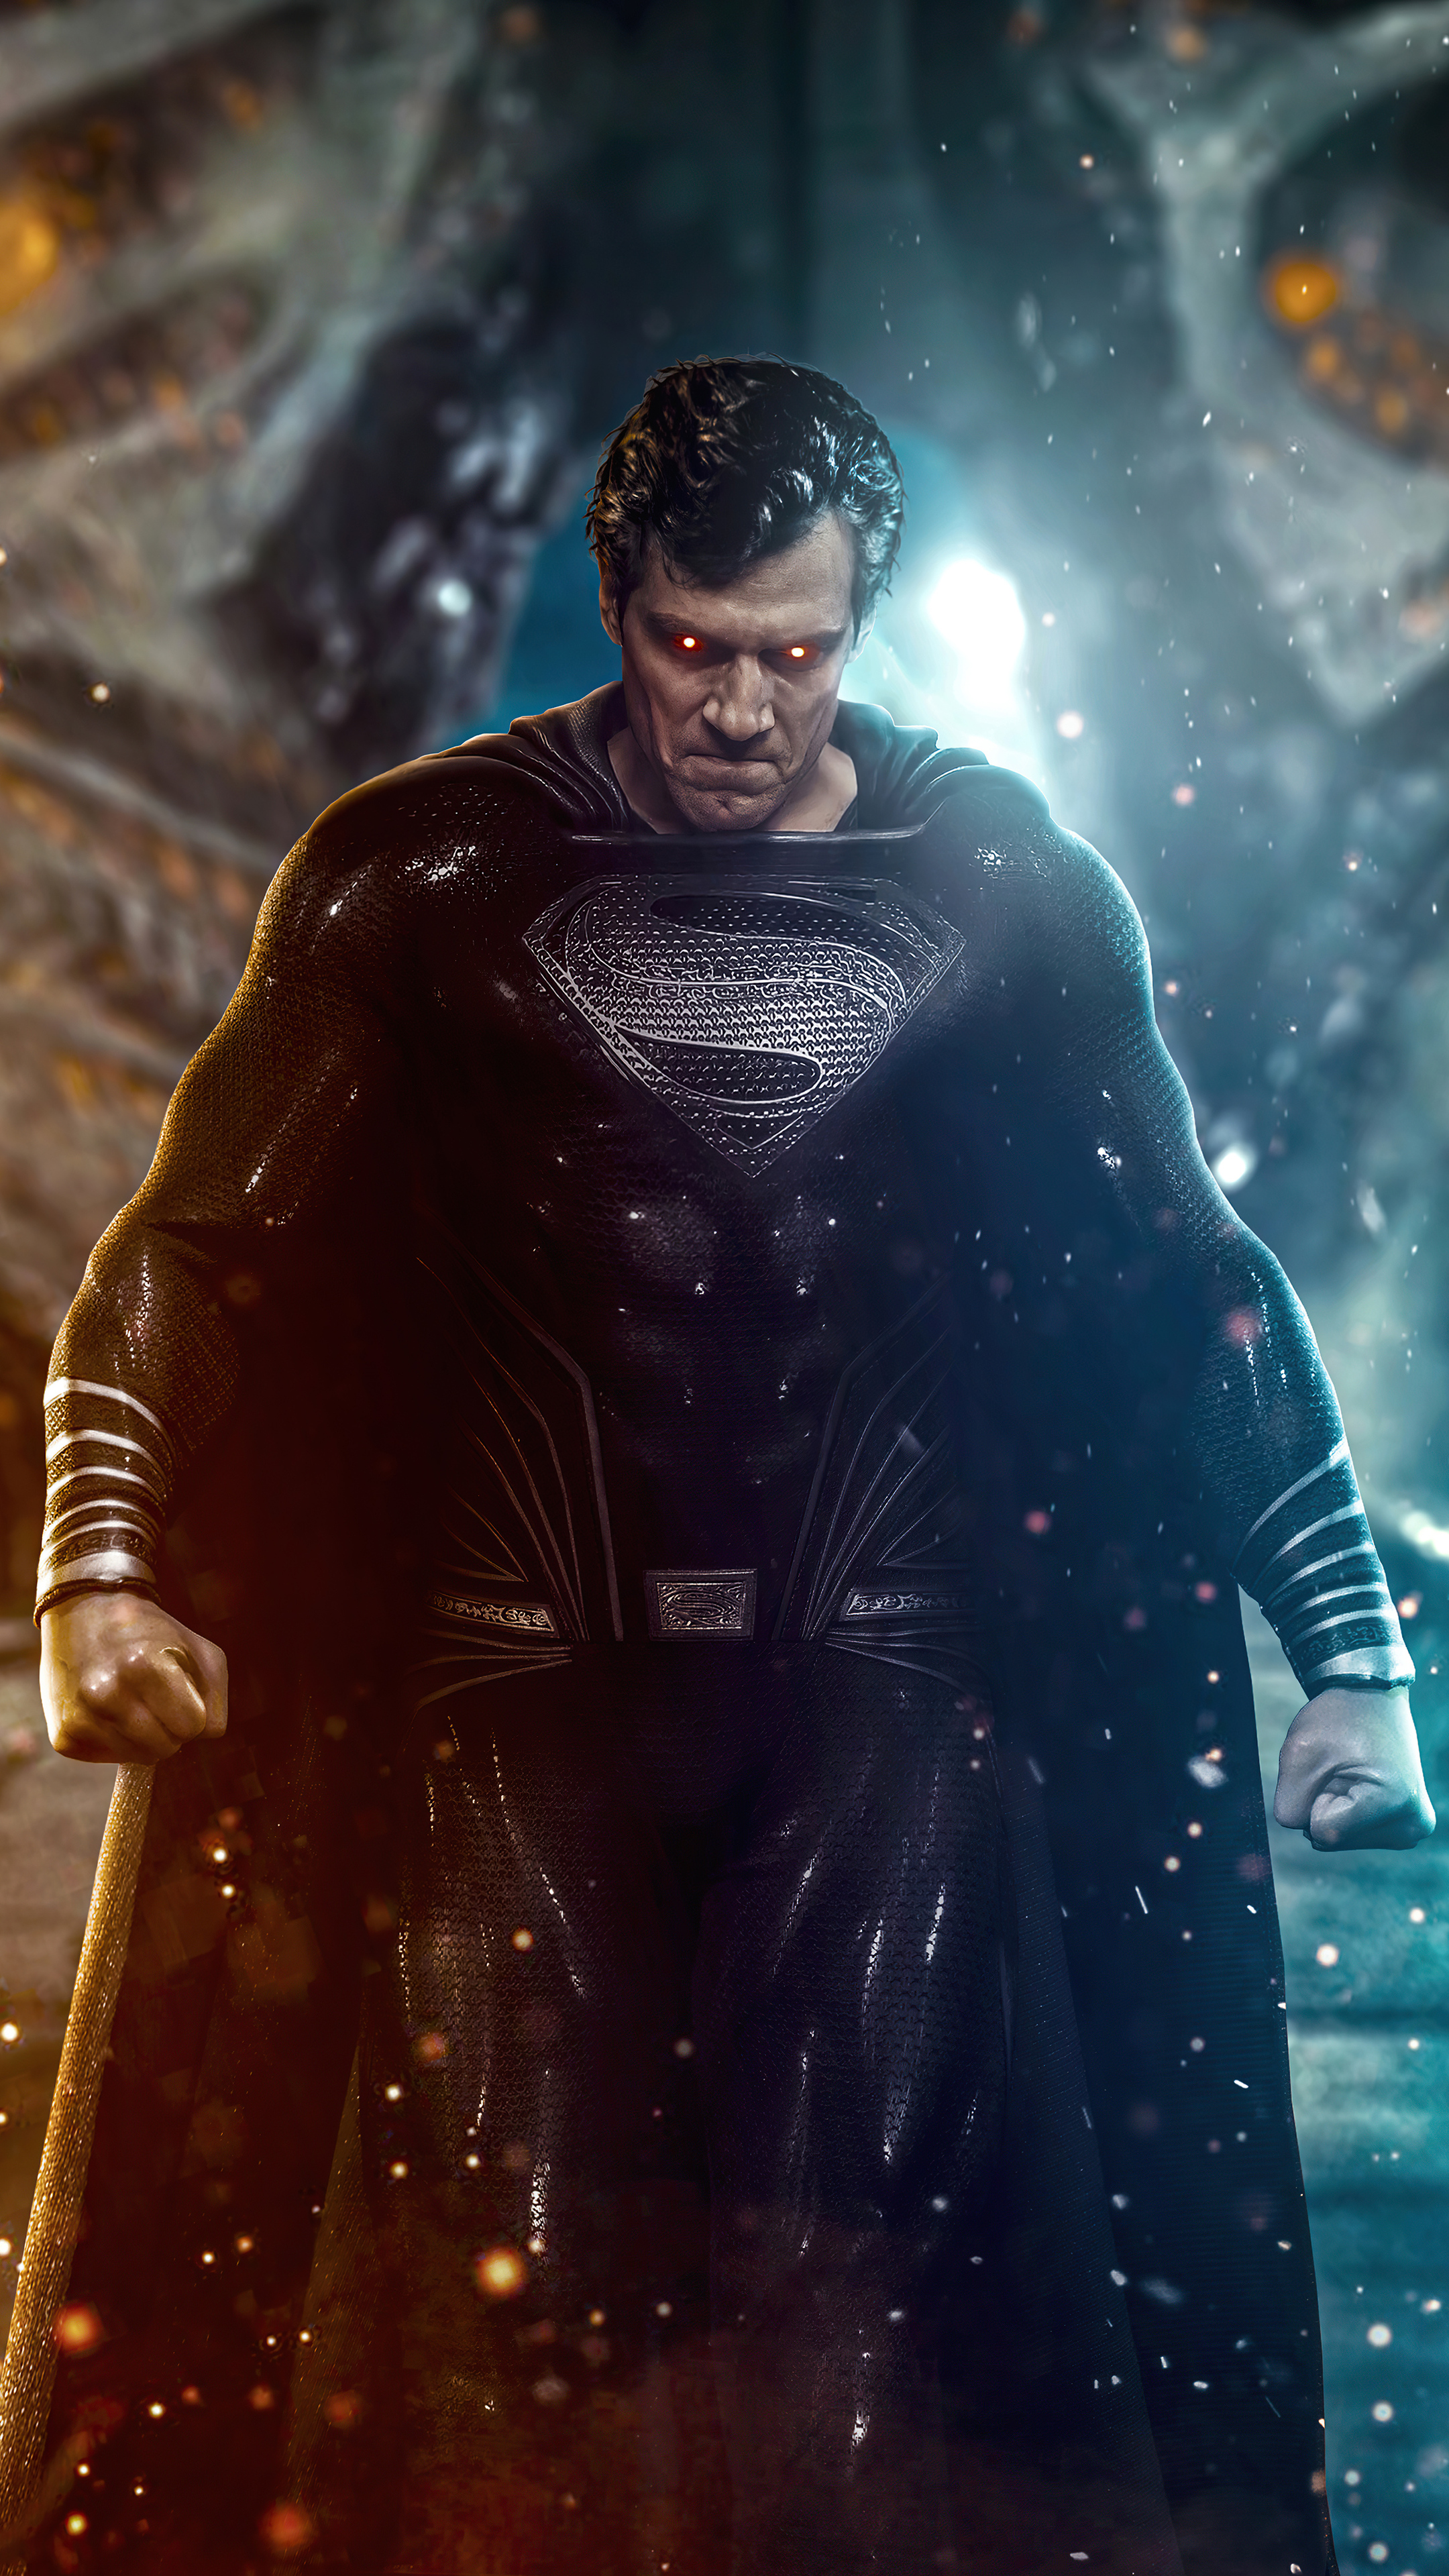 Wallpaper ID 358334  Movie Justice League Phone Wallpaper Henry Cavill  Superman 1080x2400 free download